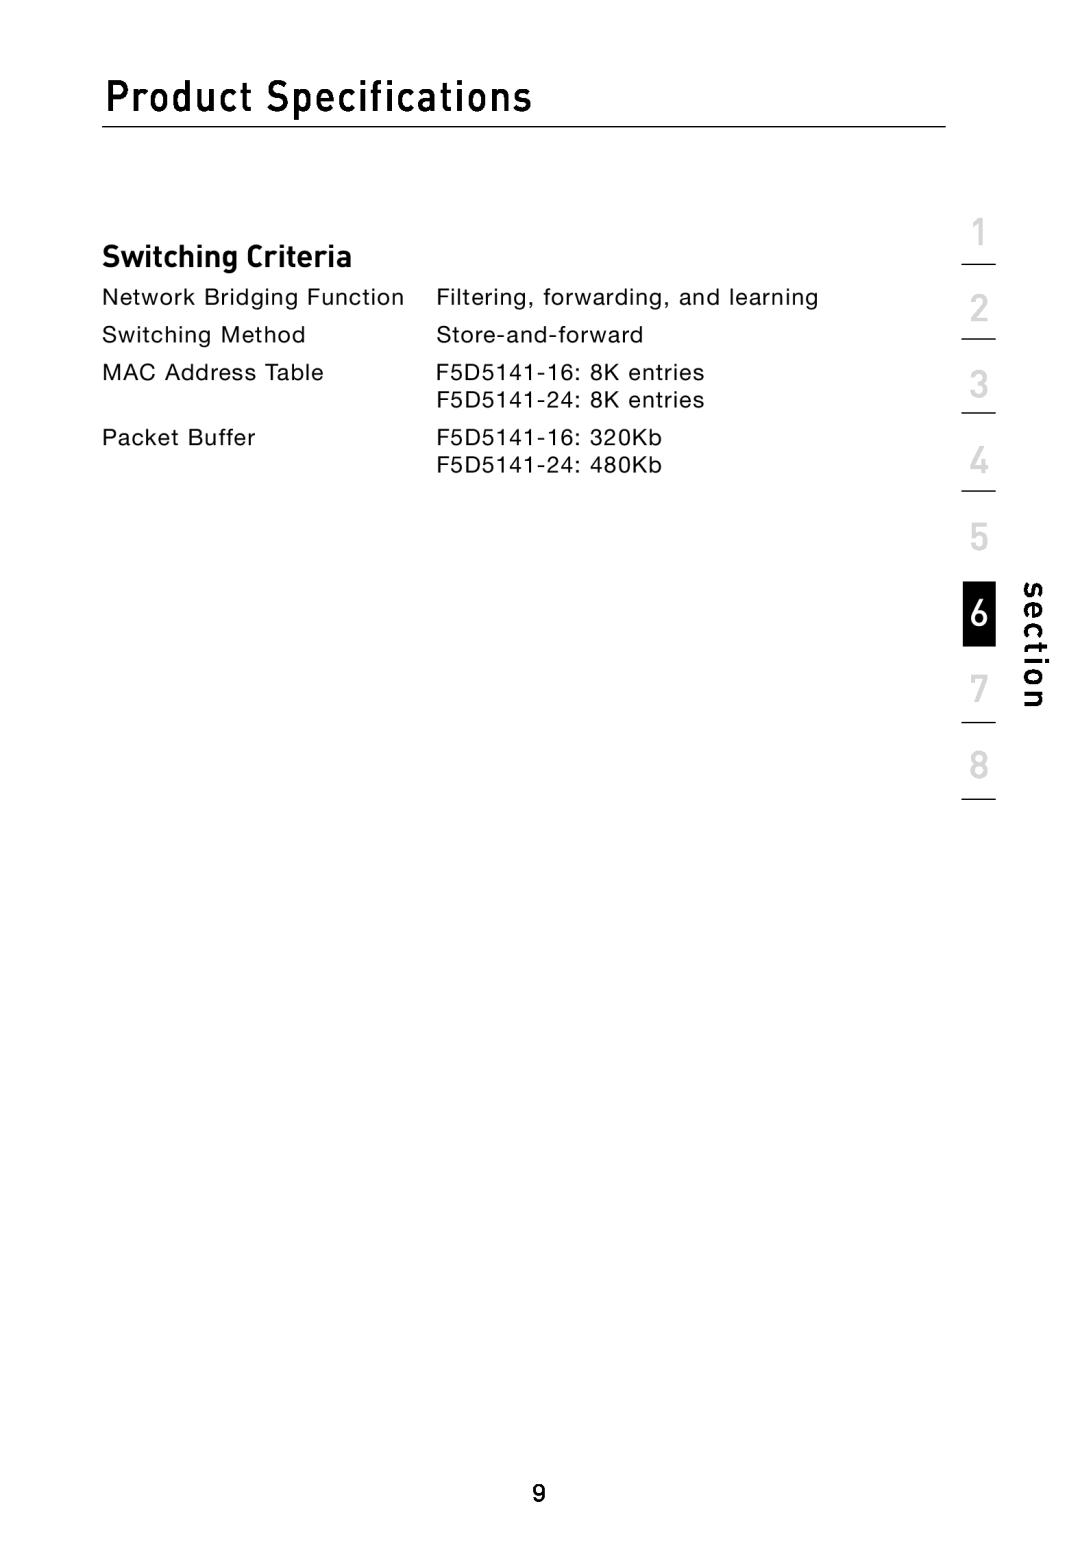 Belkin F5D5141-16, F5D5141-24 manual Switching Criteria, Product Specifications, section 